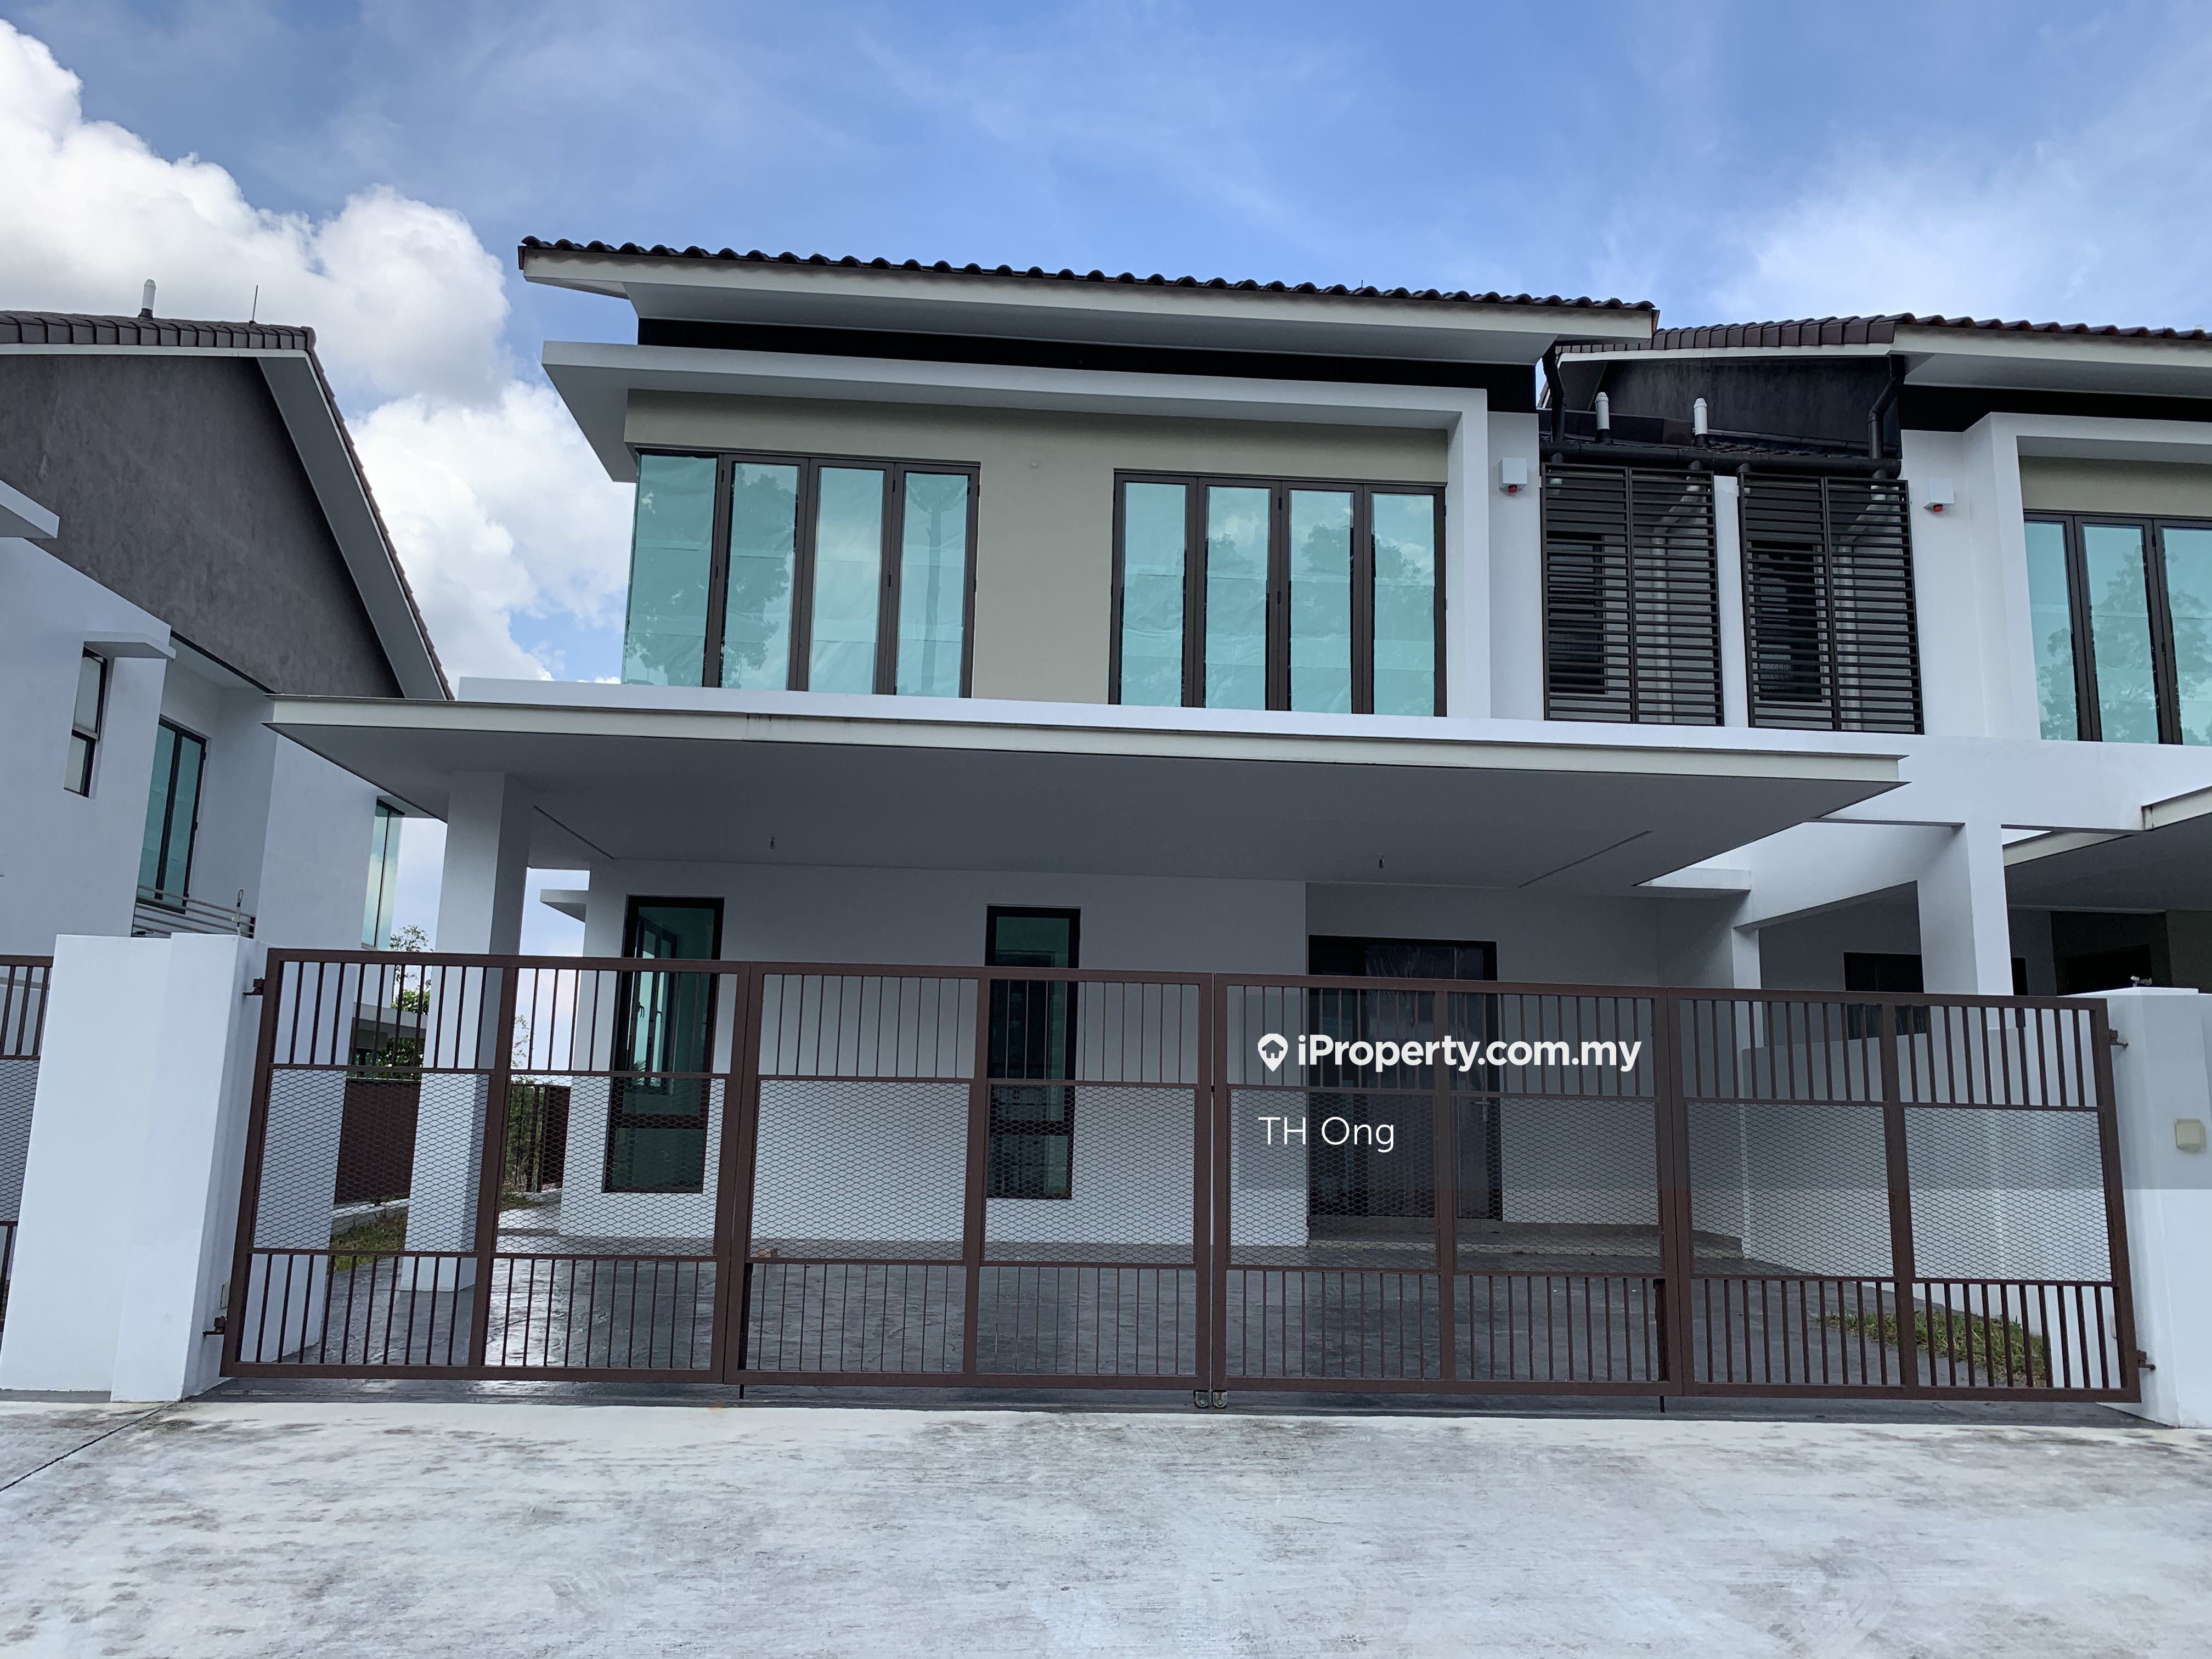 Shah Alam Bukit Jelutong Semi Detached House 5 1 Bedrooms For Sale Iproperty Com My